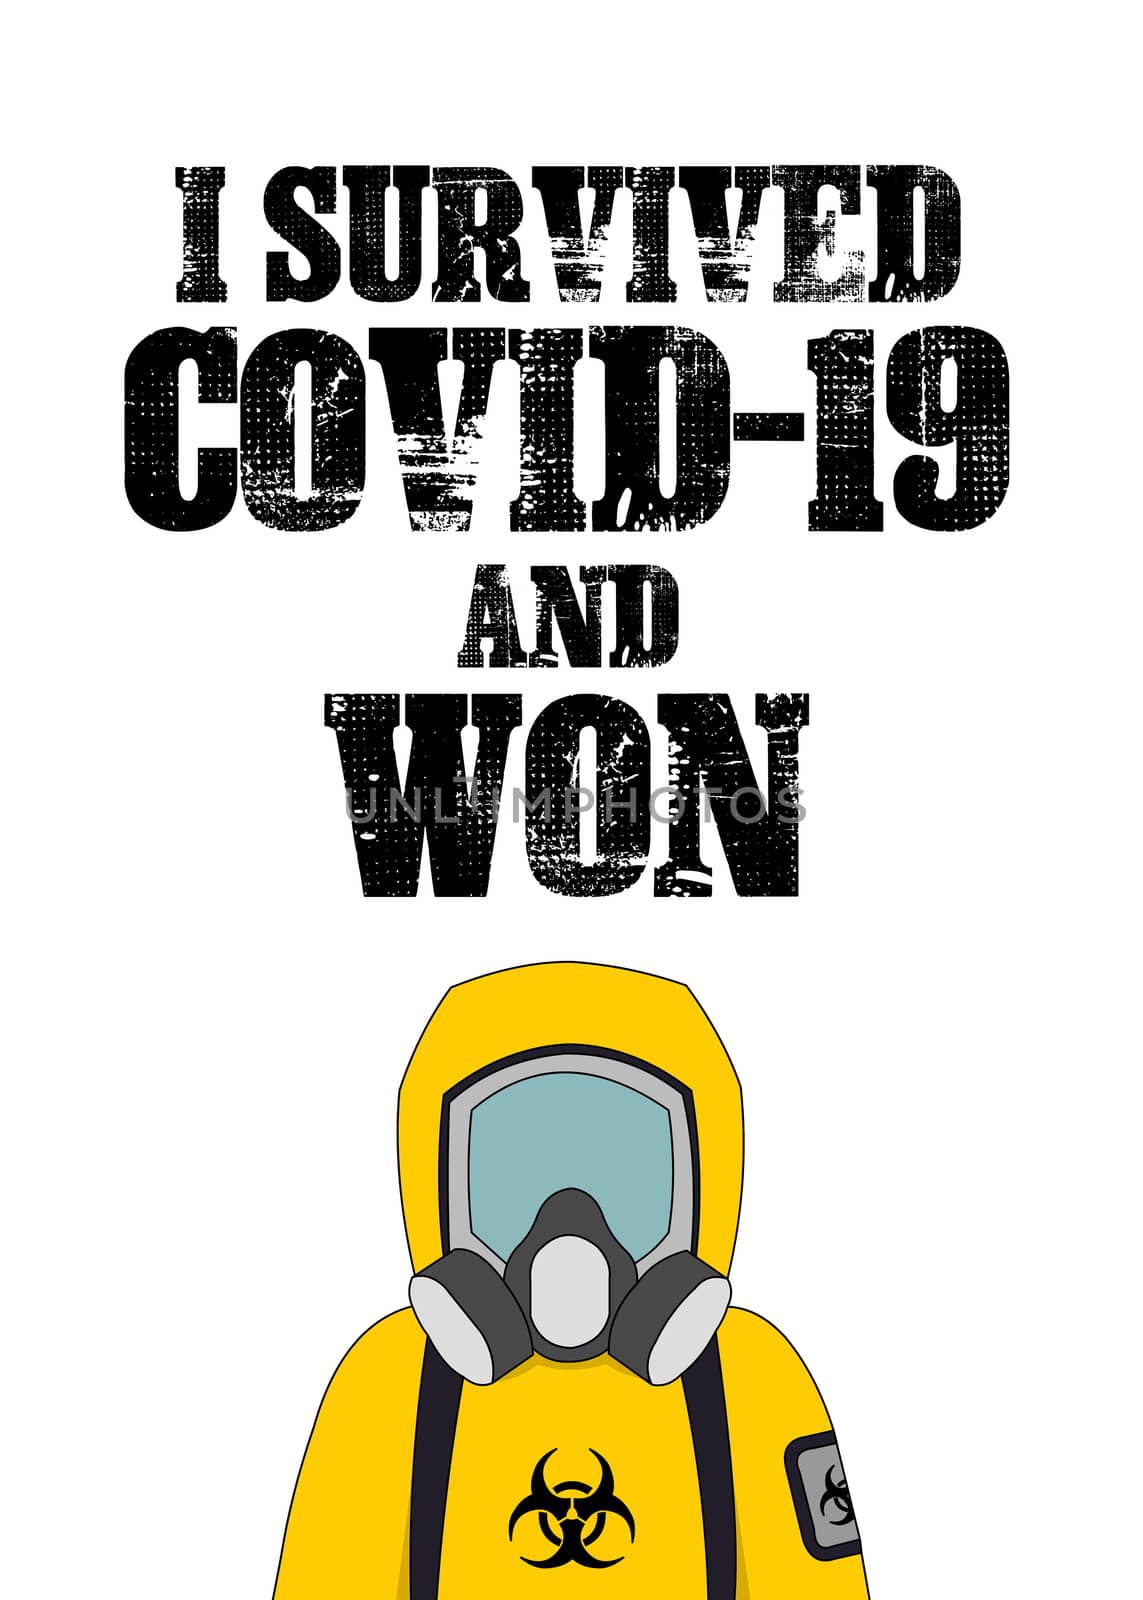 i Survived Covid-19 and Won by Bigalbaloo